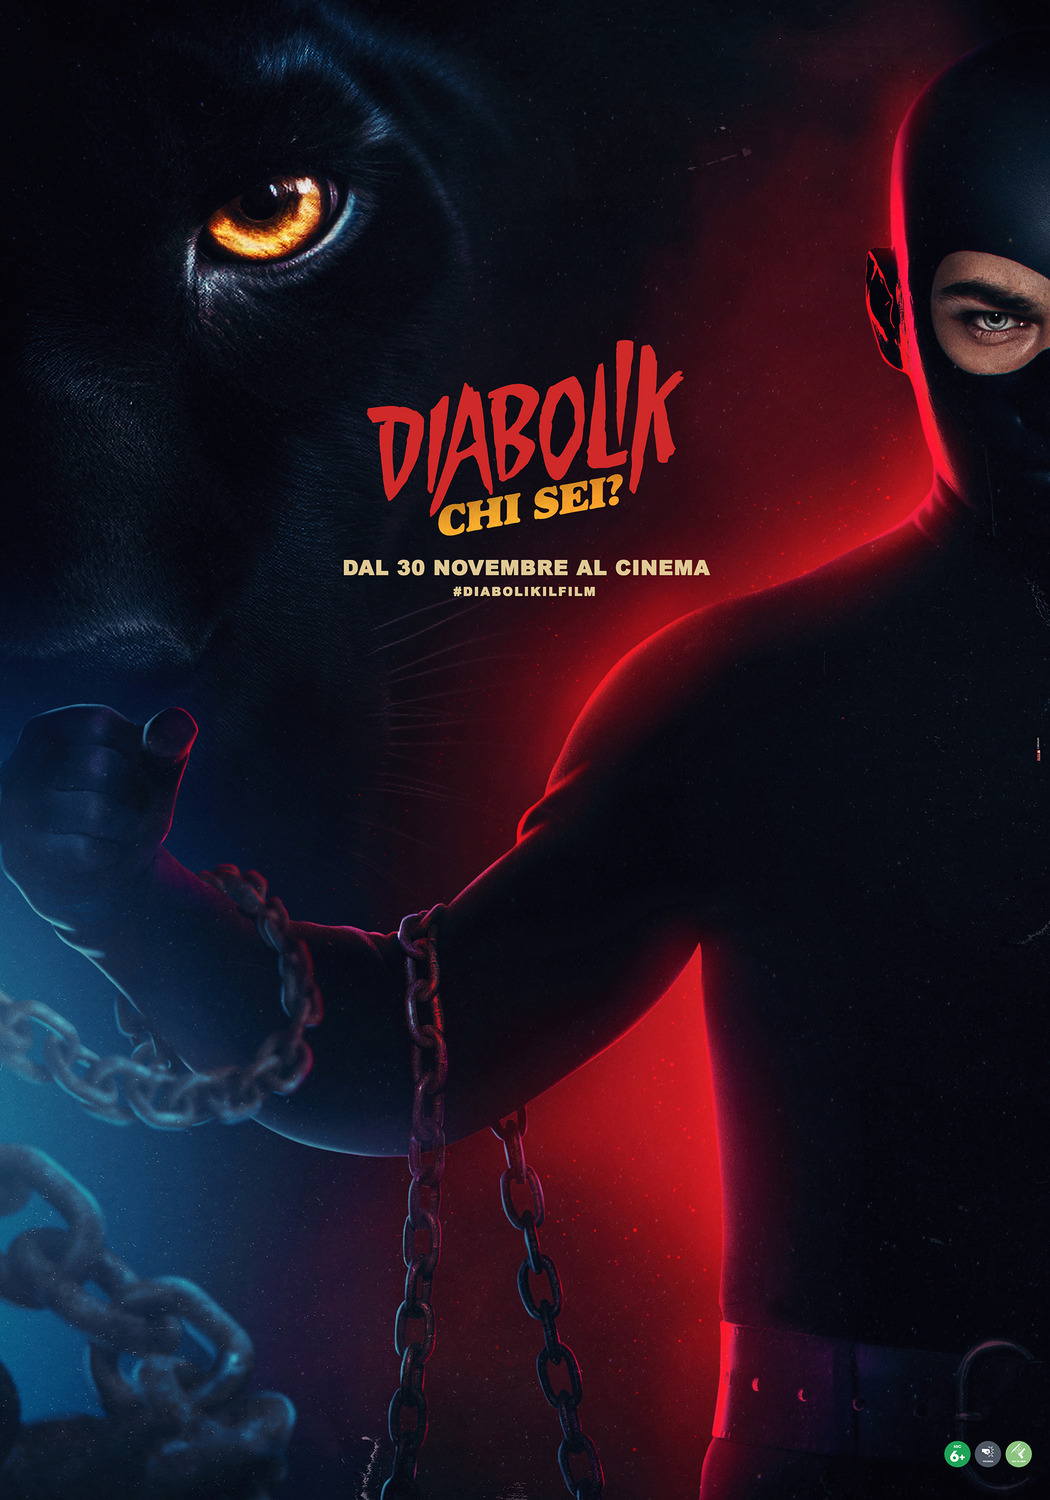 Extra Large Movie Poster Image for Diabolik chi sei? (#6 of 6)